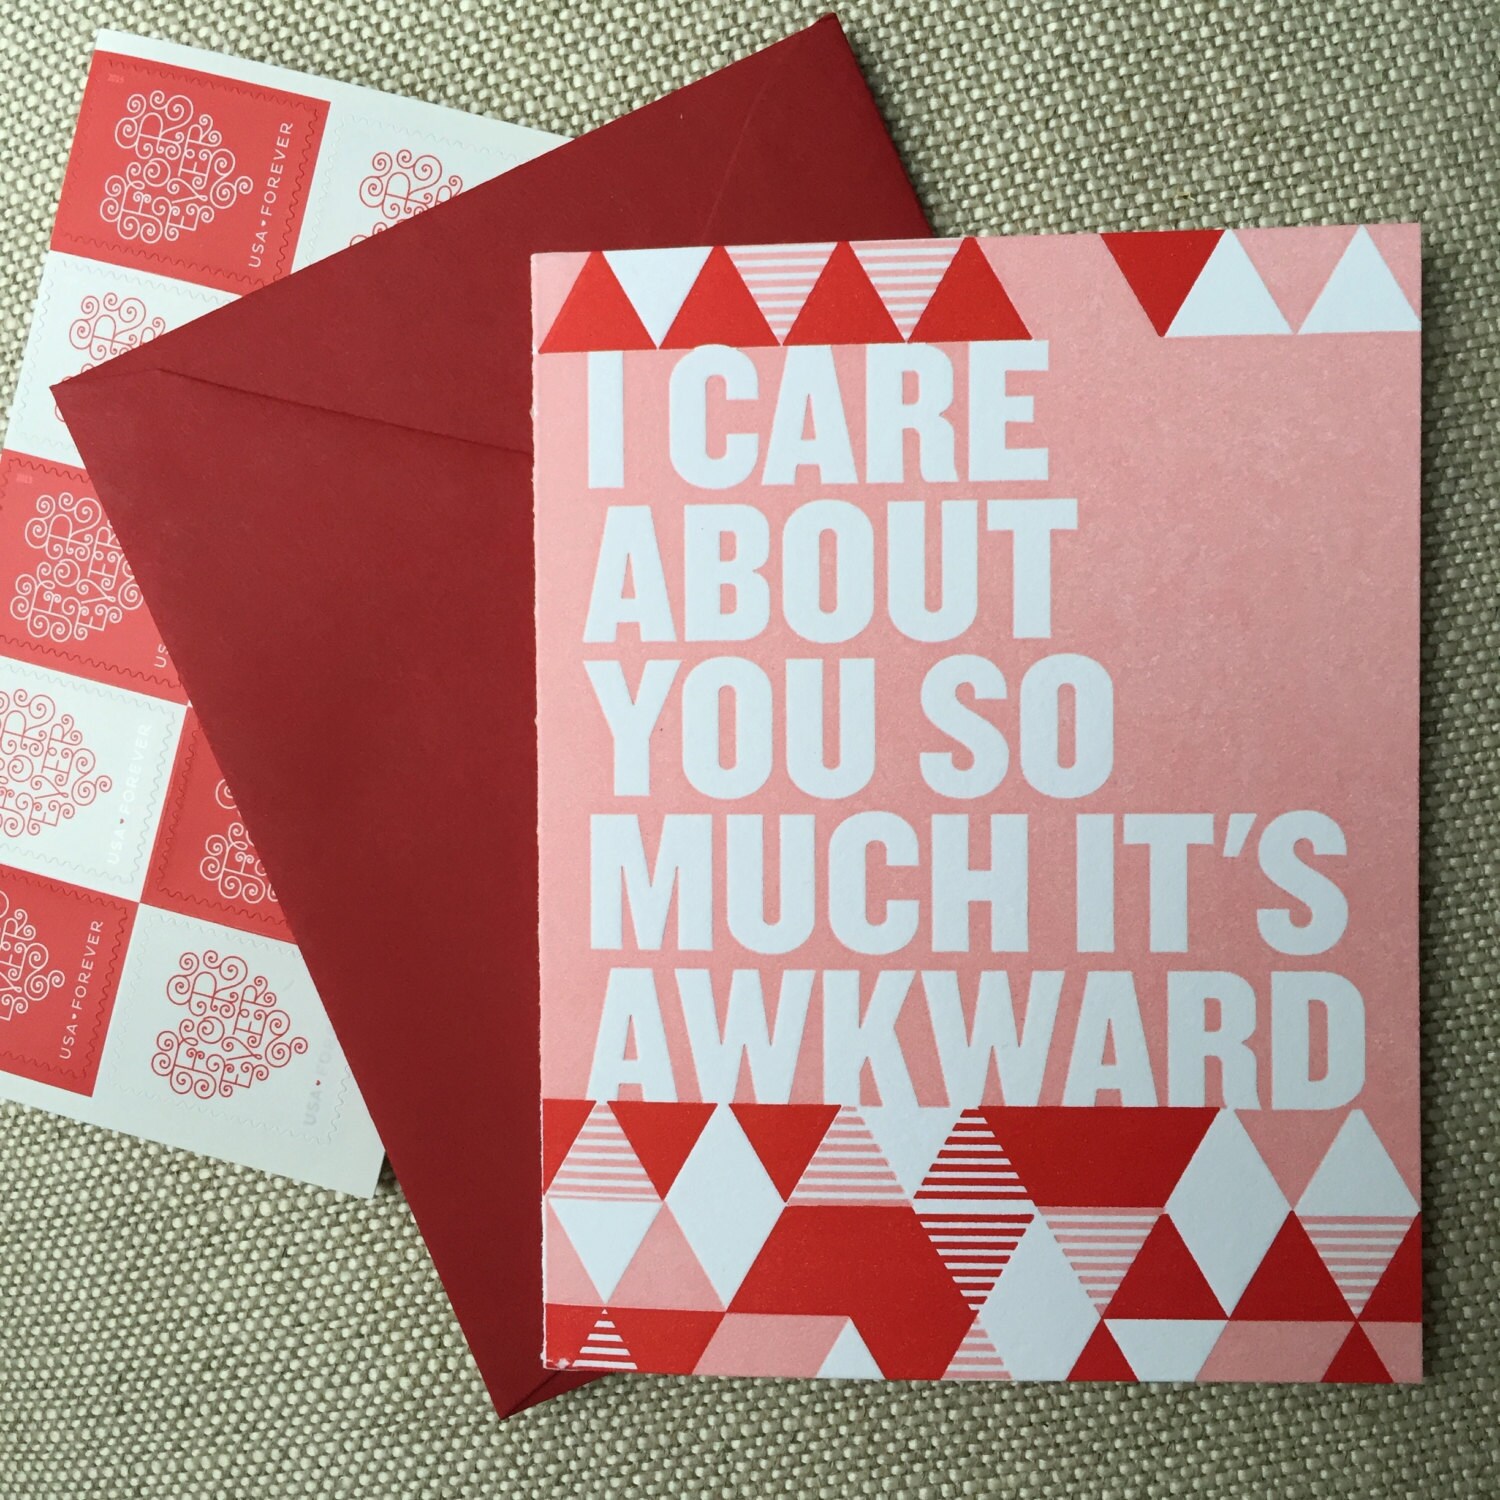 I care about you so much it's awkward letterpress printed